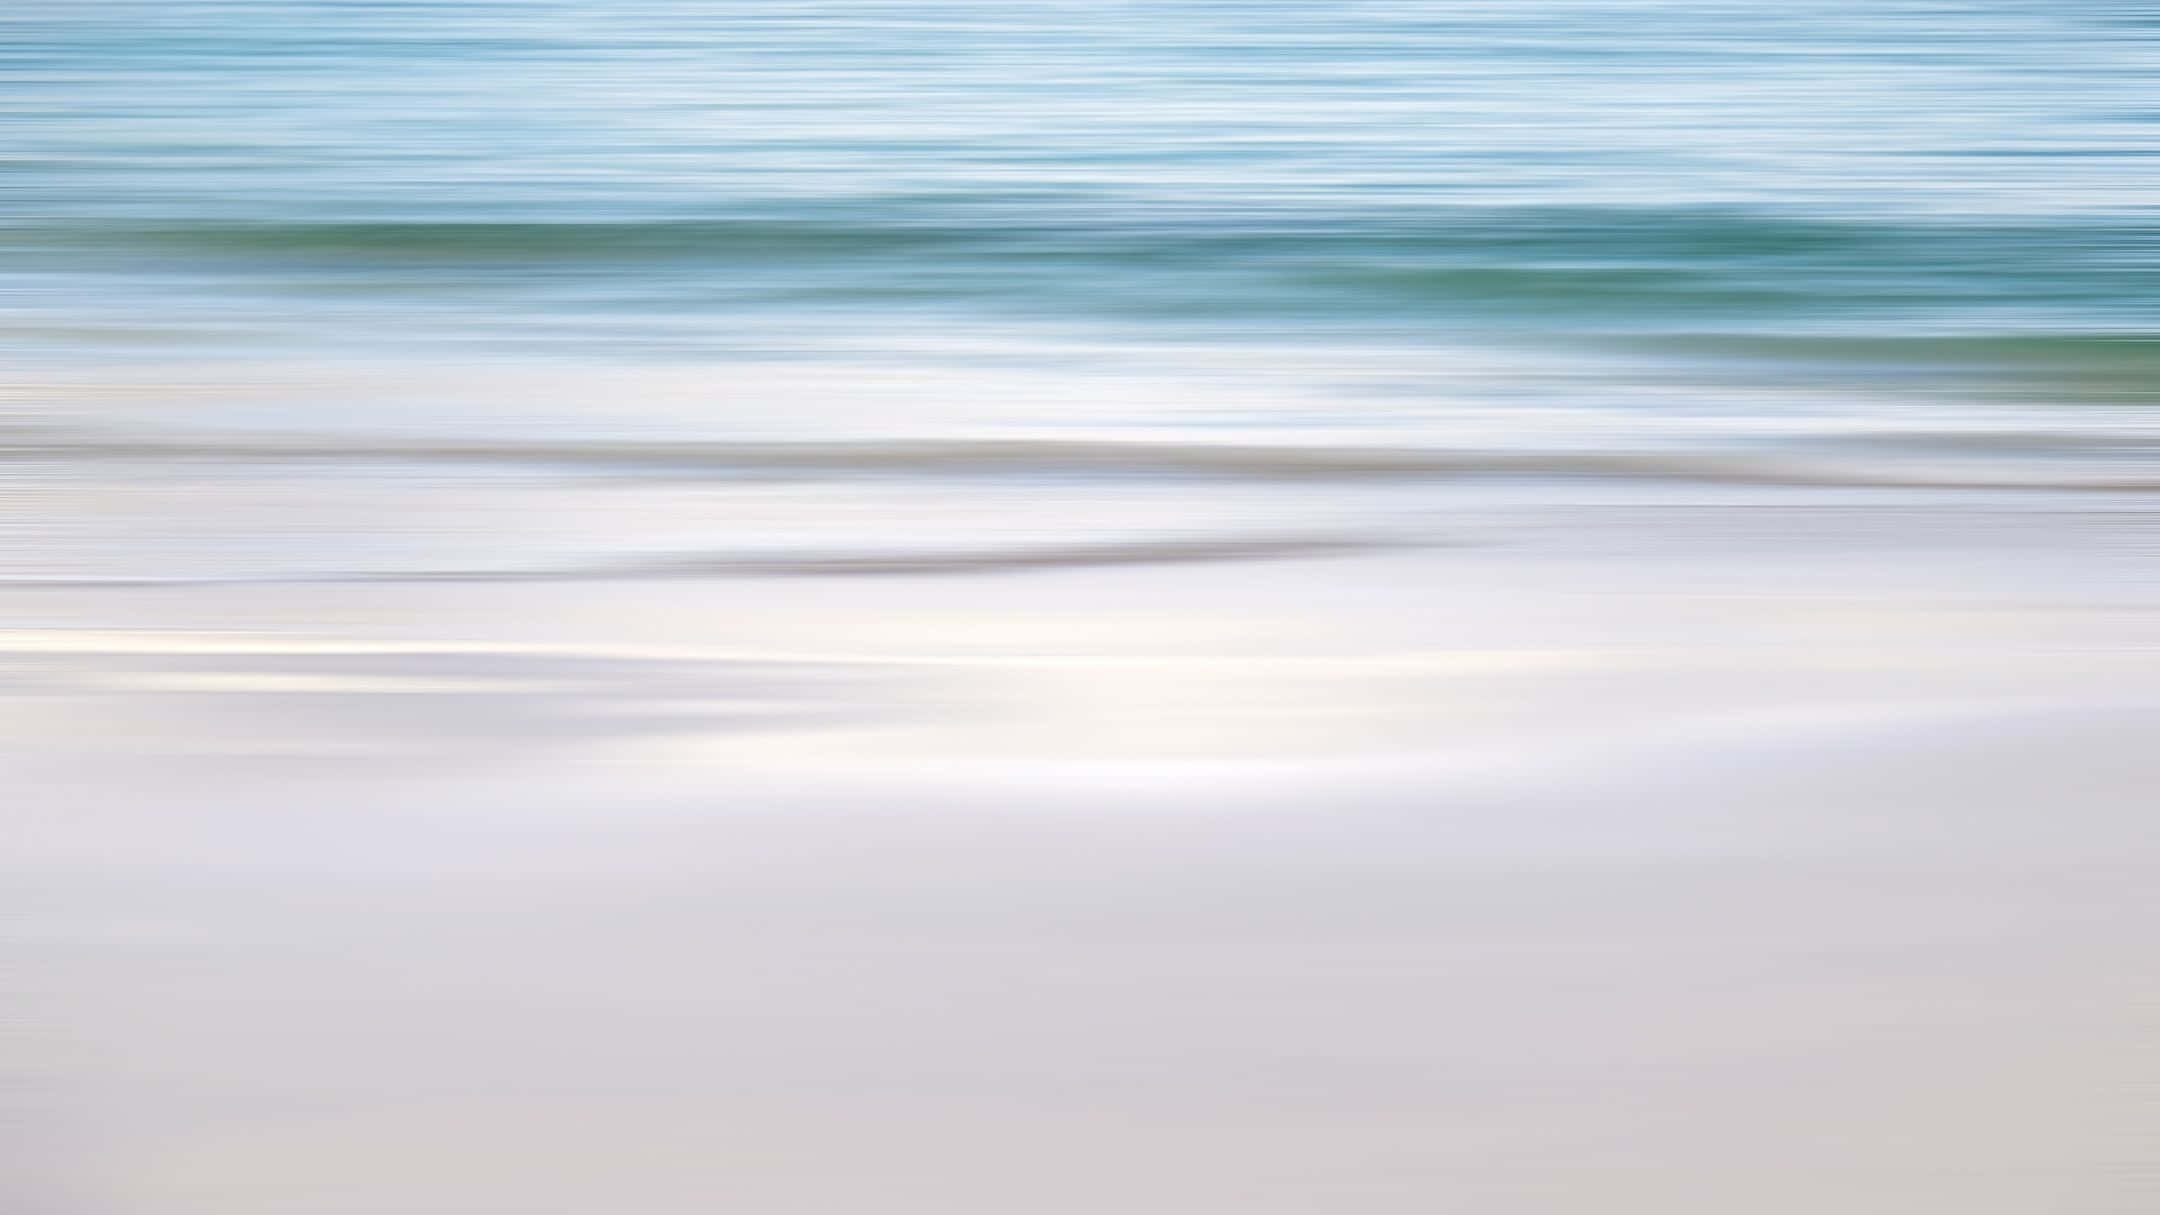 A Blurry Image Of A Beach With Water And Sand Wallpaper